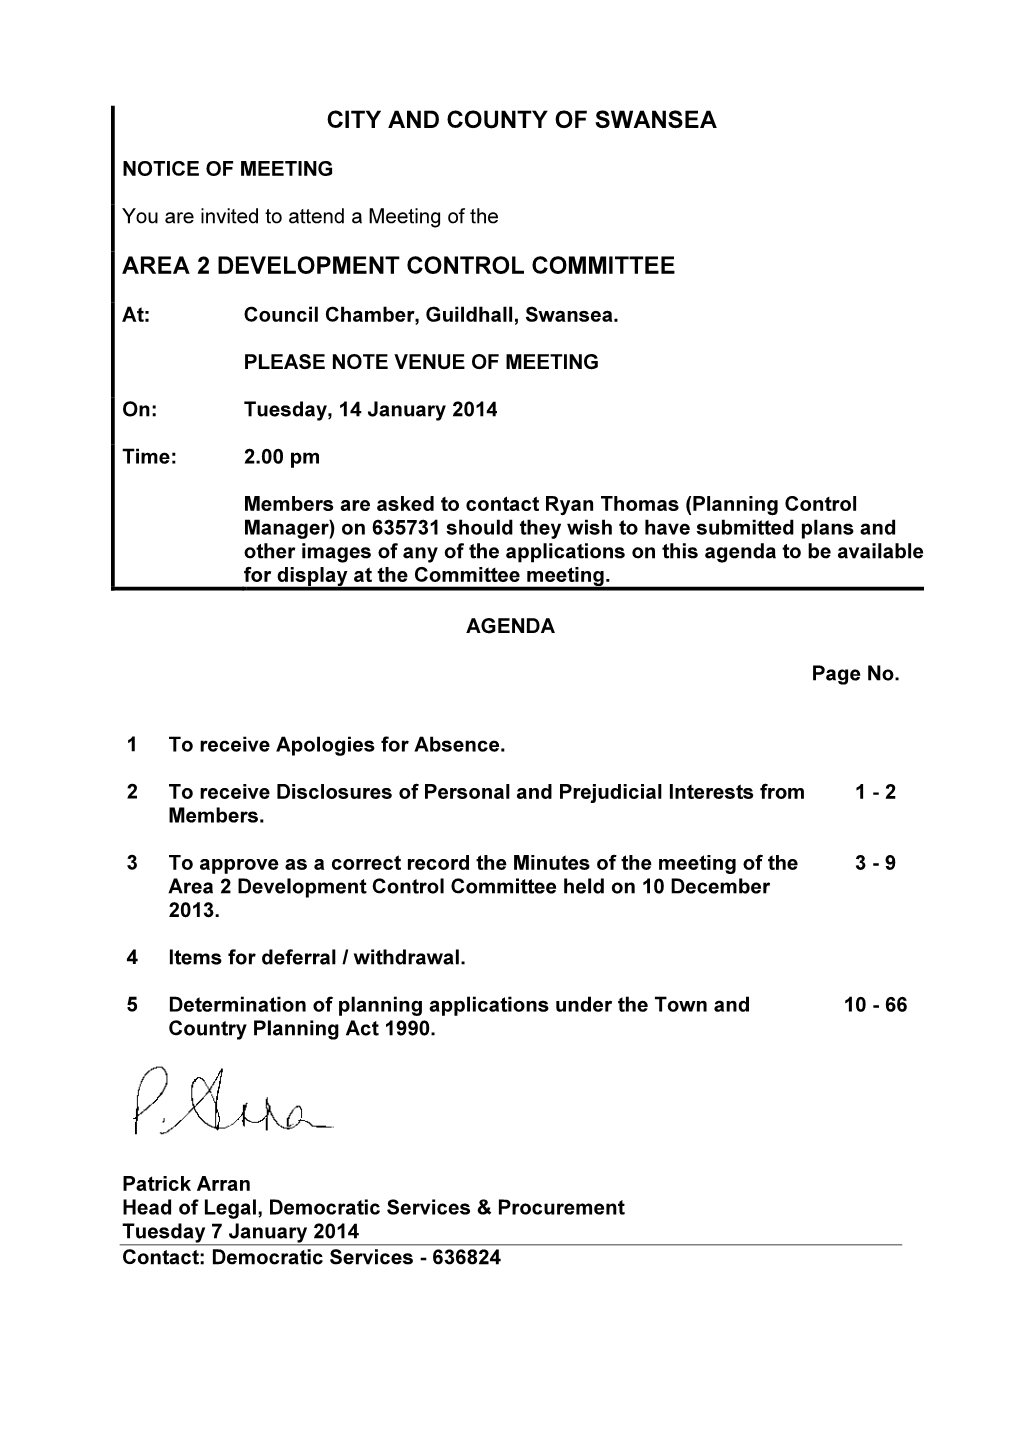 City and County of Swansea Area 2 Development Control Committee